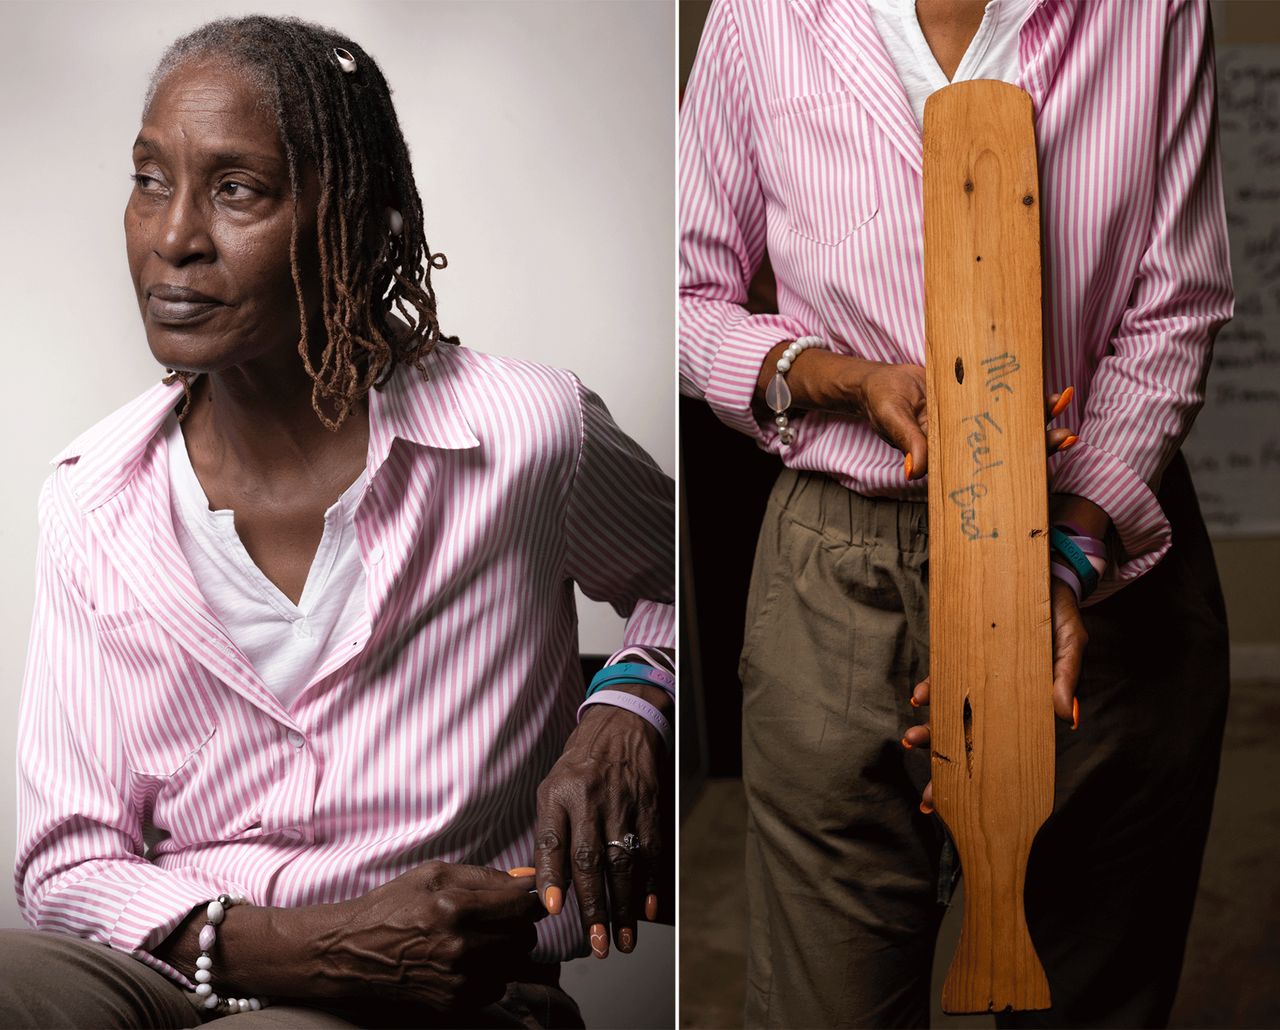 LEFT: Ellen Reddy, the Exective Director of the Nollie Jenkins Family Center in Durant, Mississippi, is a leading opponent of corporal punishment in public schools. RIGHT: Reddy holds a paddle that has been used in traditional forms of corporal punishment in Mississippi schools.